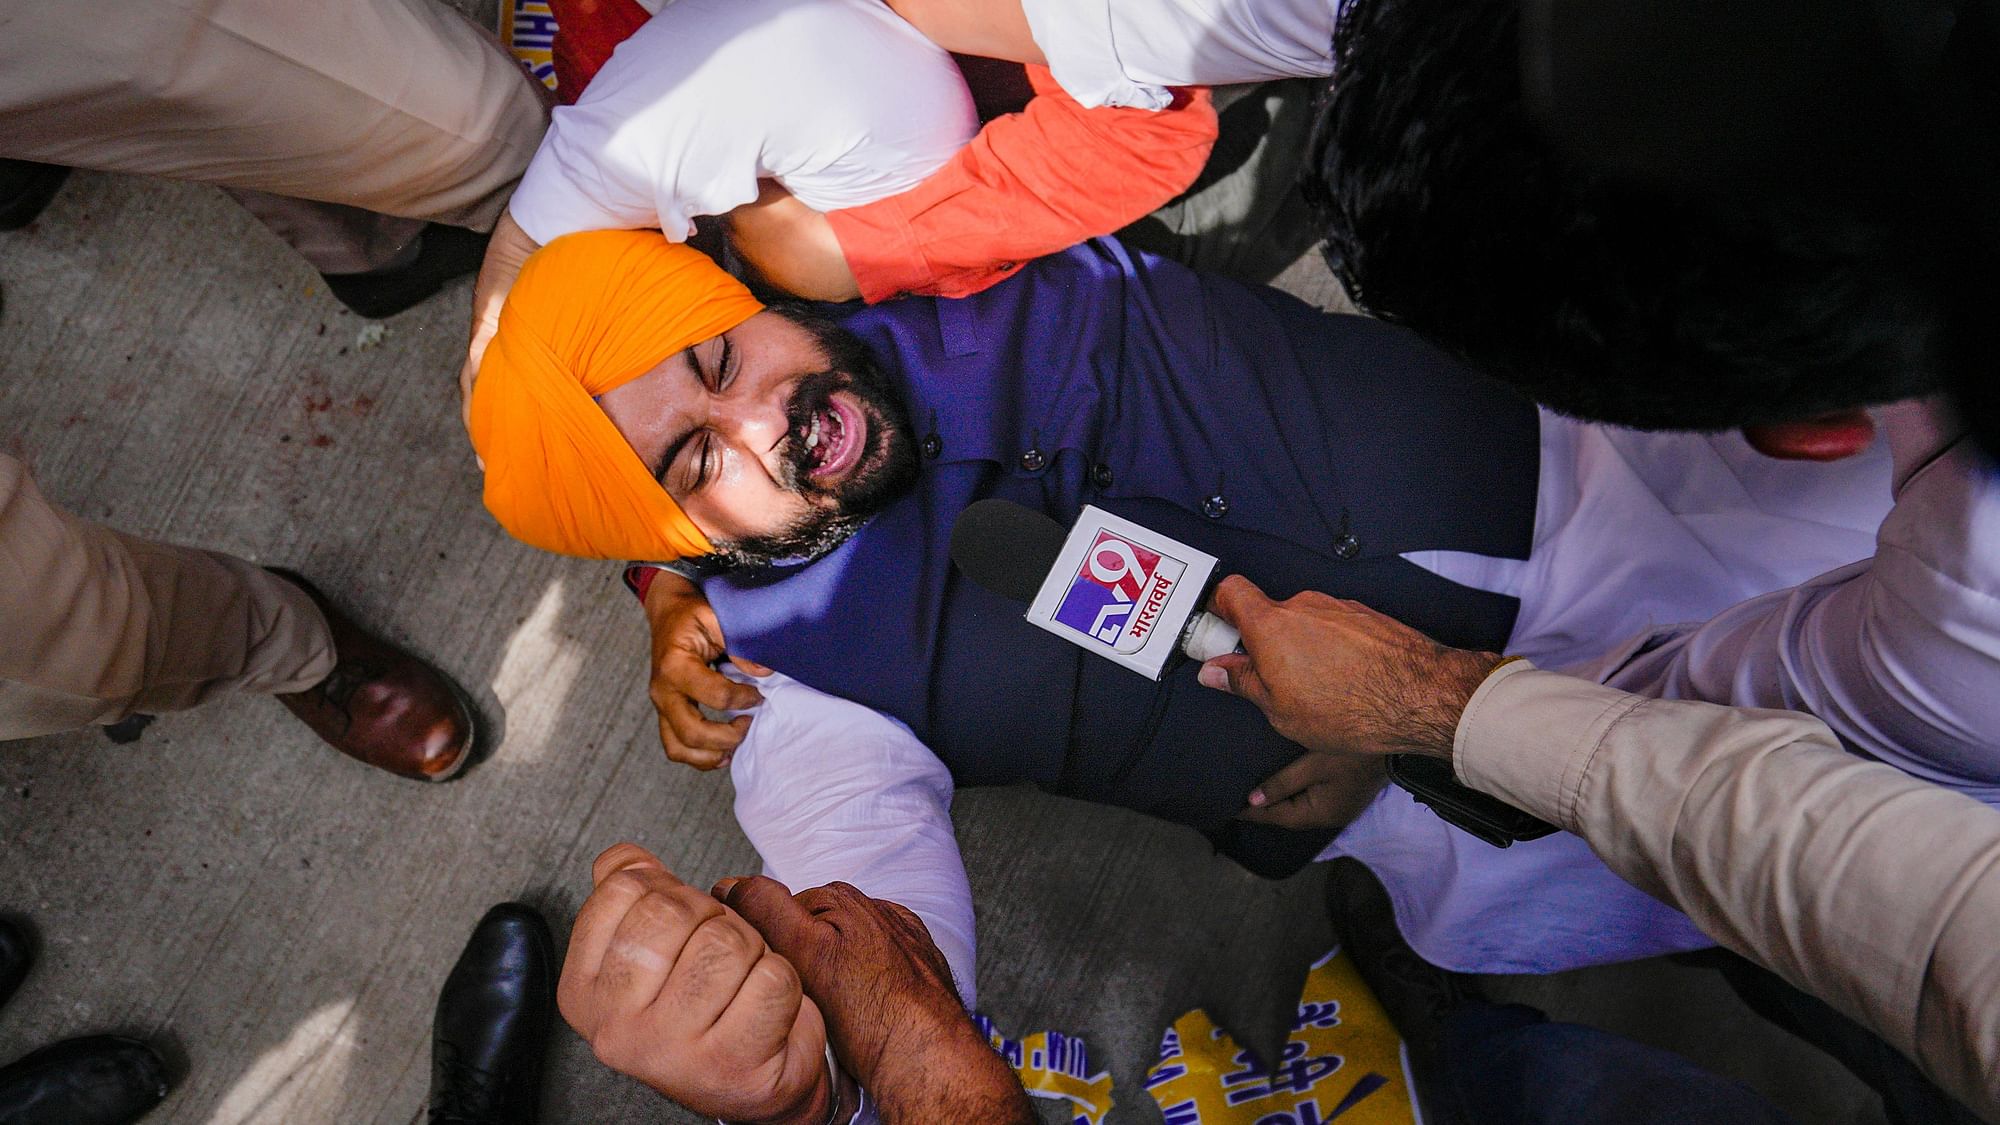 <div class="paragraphs"><p>Security personnel detain Punjab Minister and AAP leader Harjot Singh Bains during their protest outside Patel Chowk metro station against the arrest of Delhi CM Arvind Kejriwal, in New Delhi, on Tuesday, 26 March.</p></div>